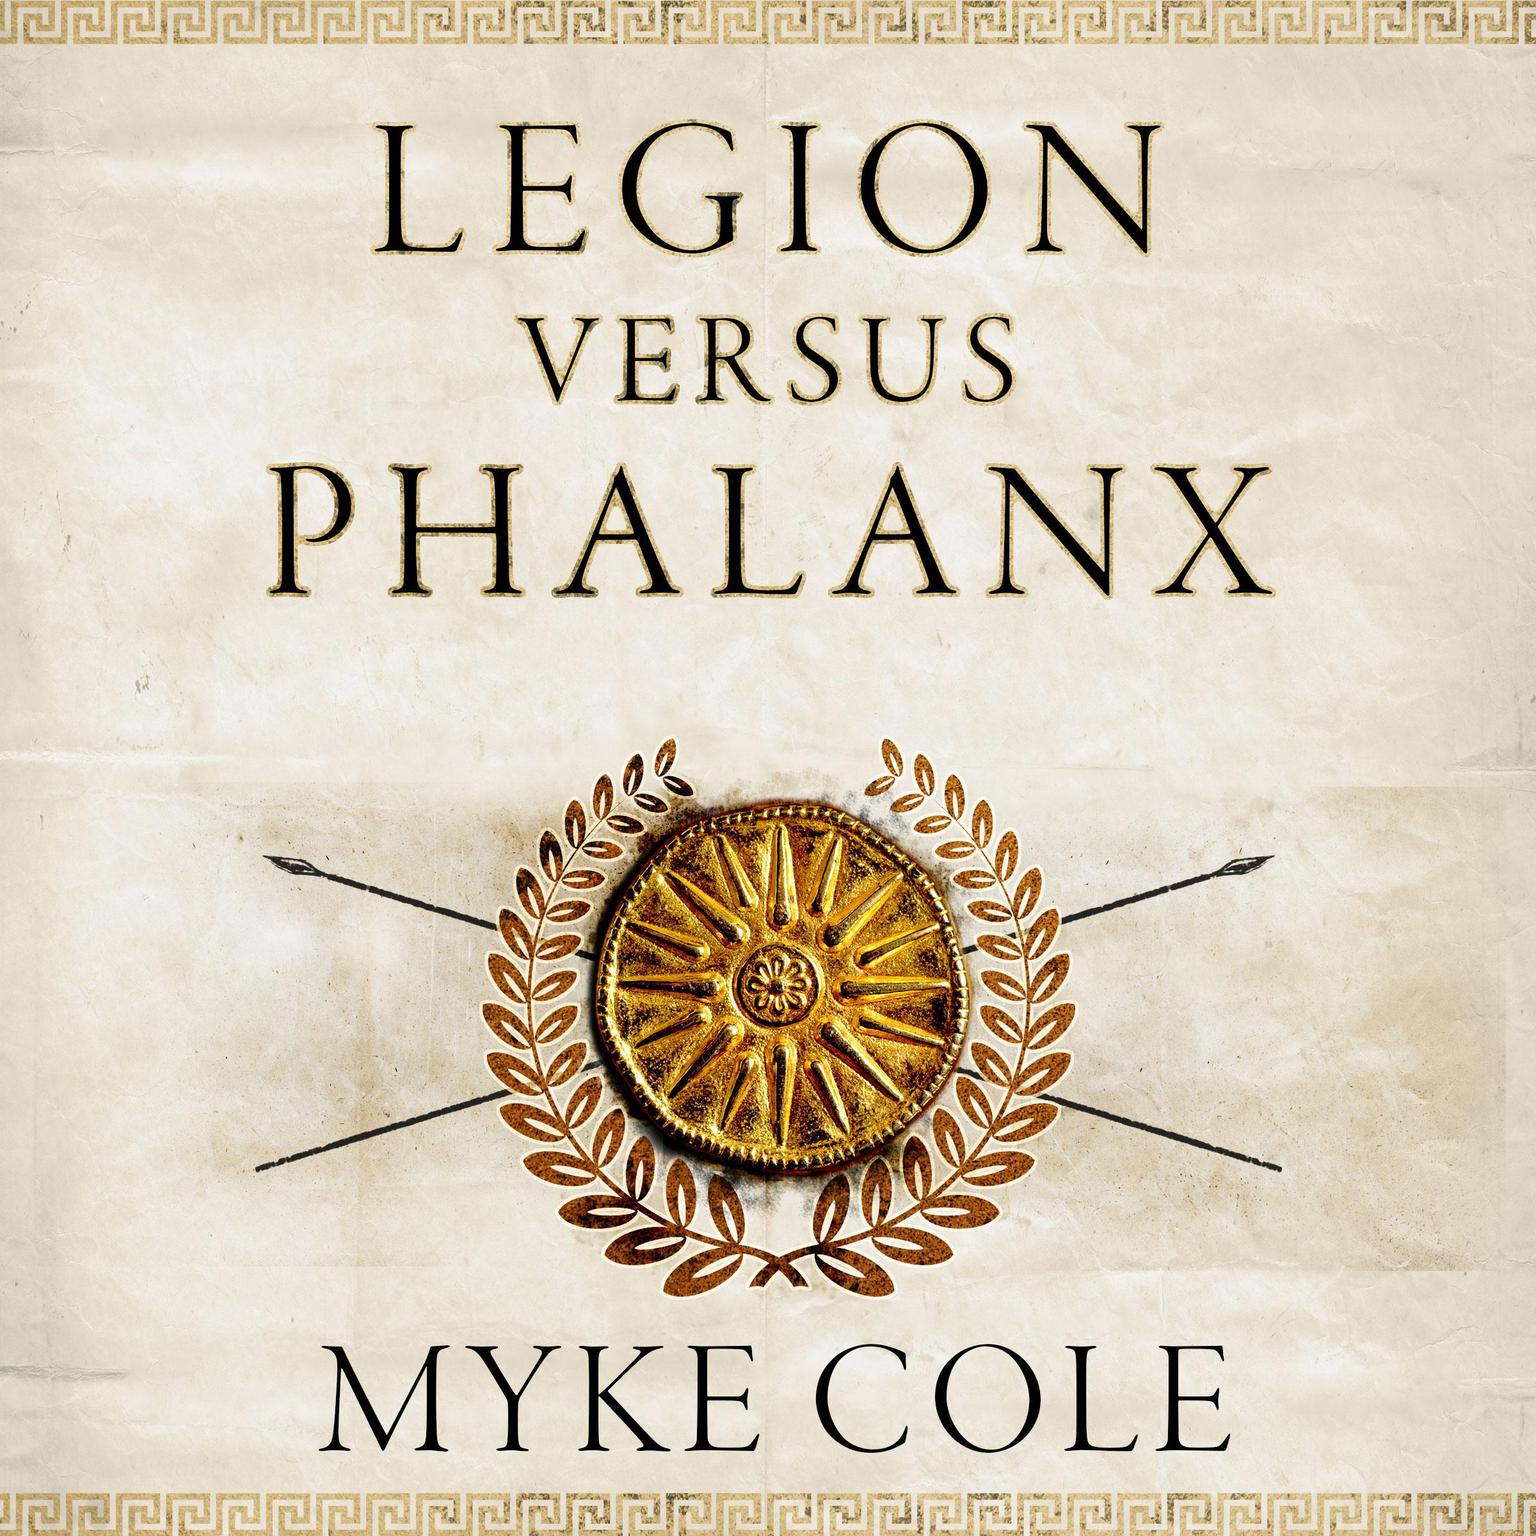 Legion versus Phalanx: The Epic Struggle for Infantry Supremacy in the Ancient World Audiobook, by Myke Cole